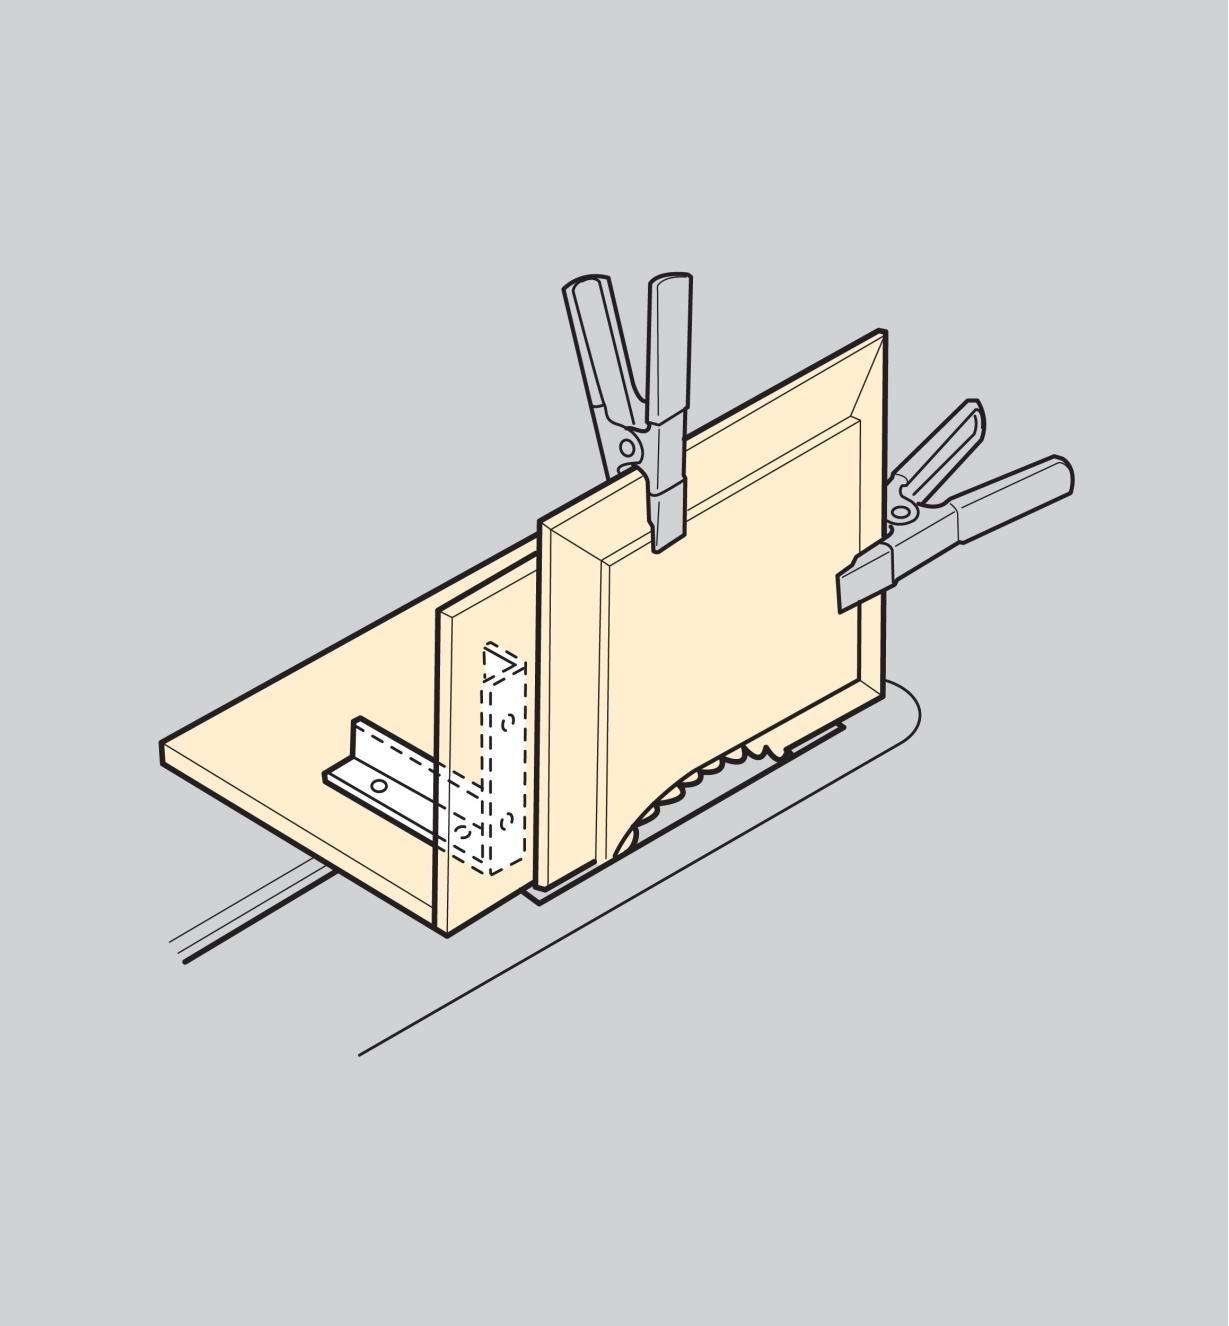 Illustration of assembly braces used to build a jig for a table saw